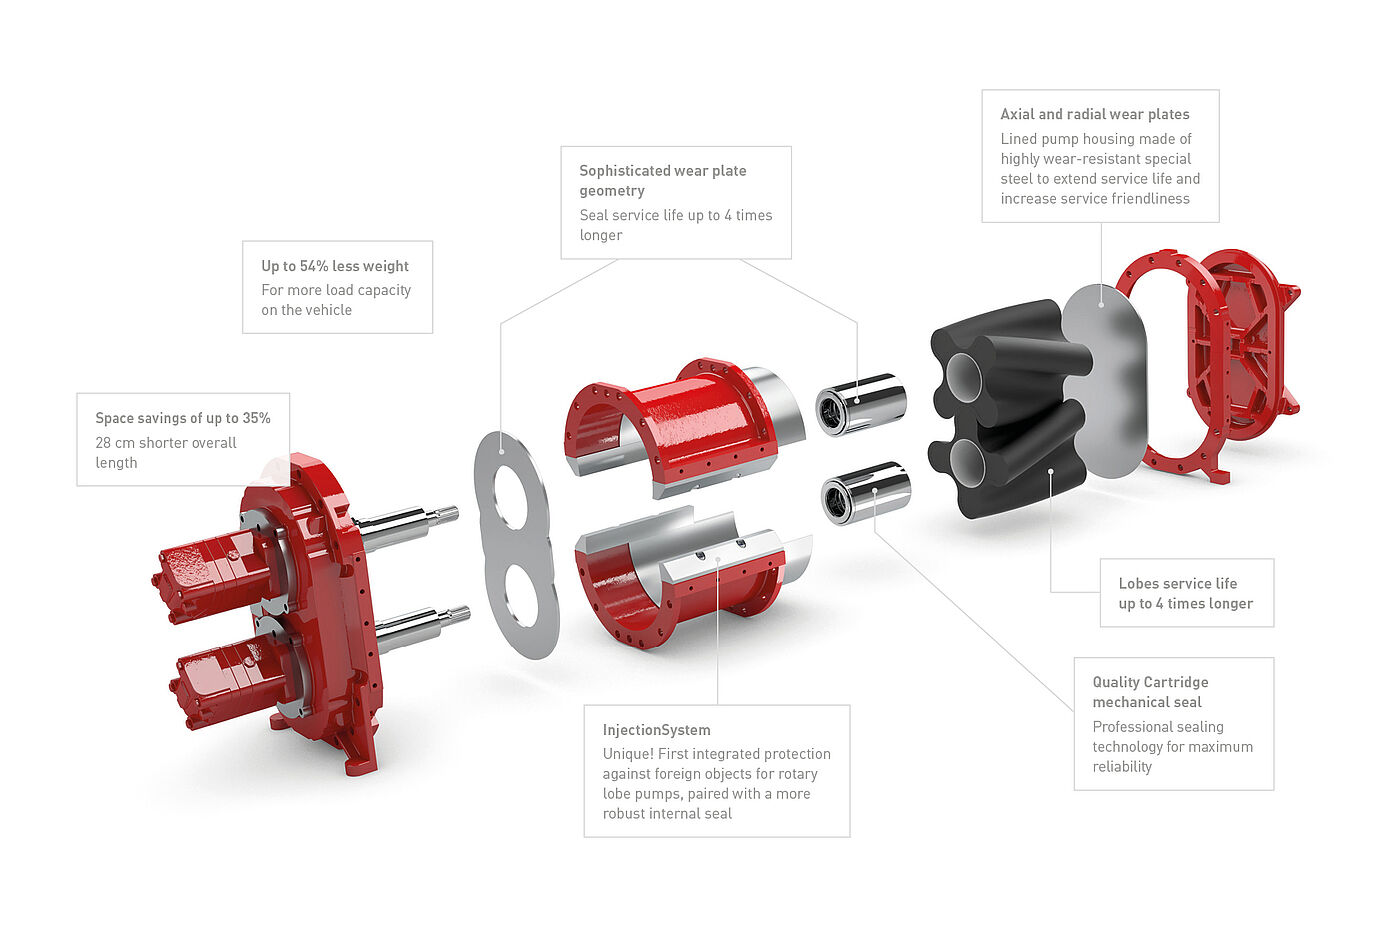 The gearless rotary lobe pump of the GL series by Vogelsang